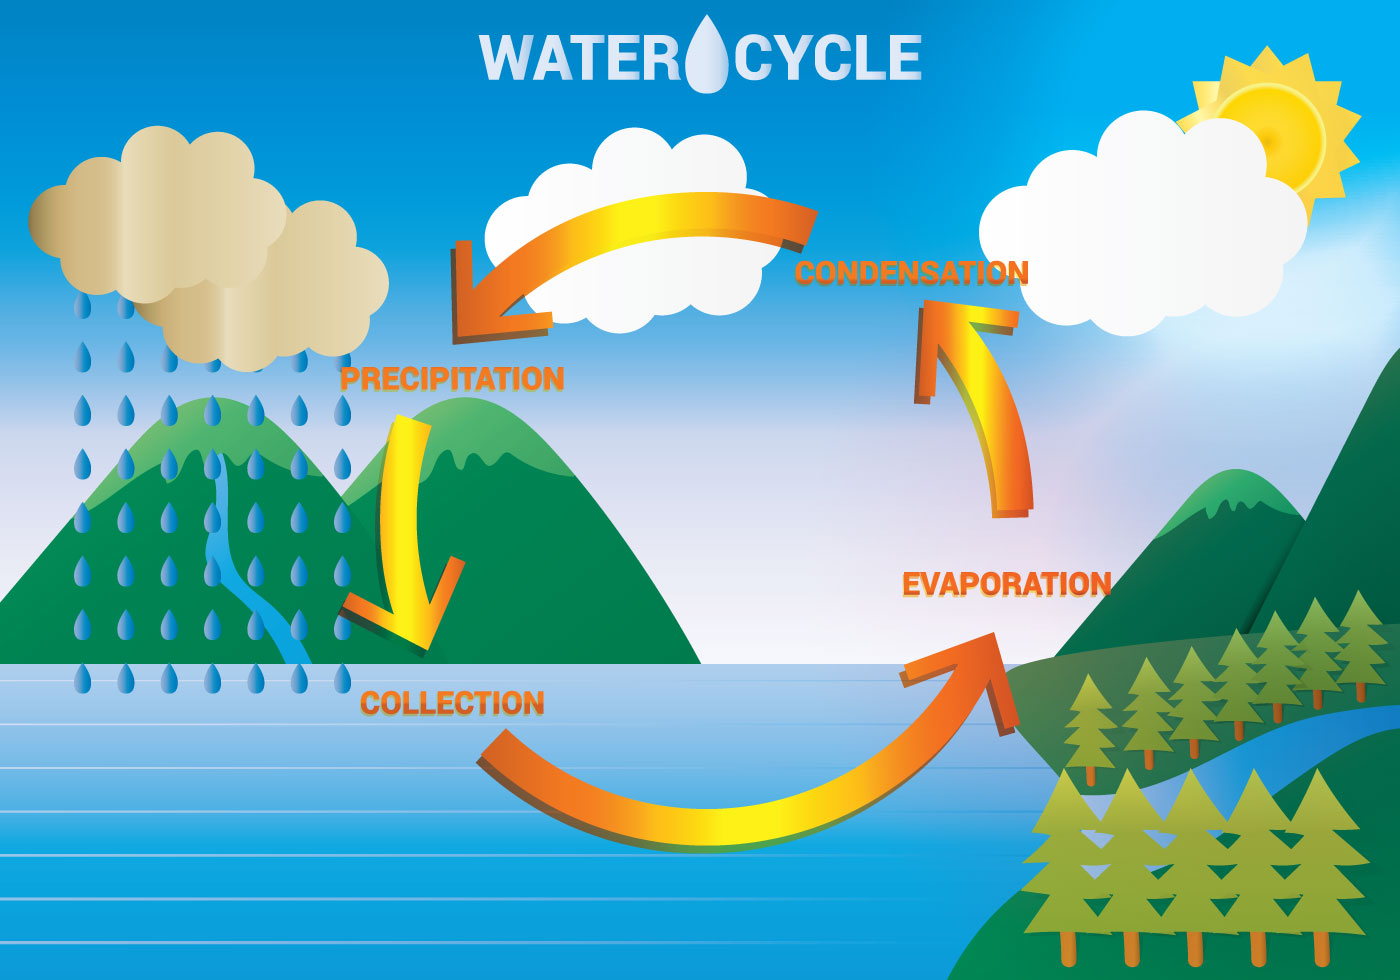 Water Cycle Free Vector Art - (35,468 Free Downloads)